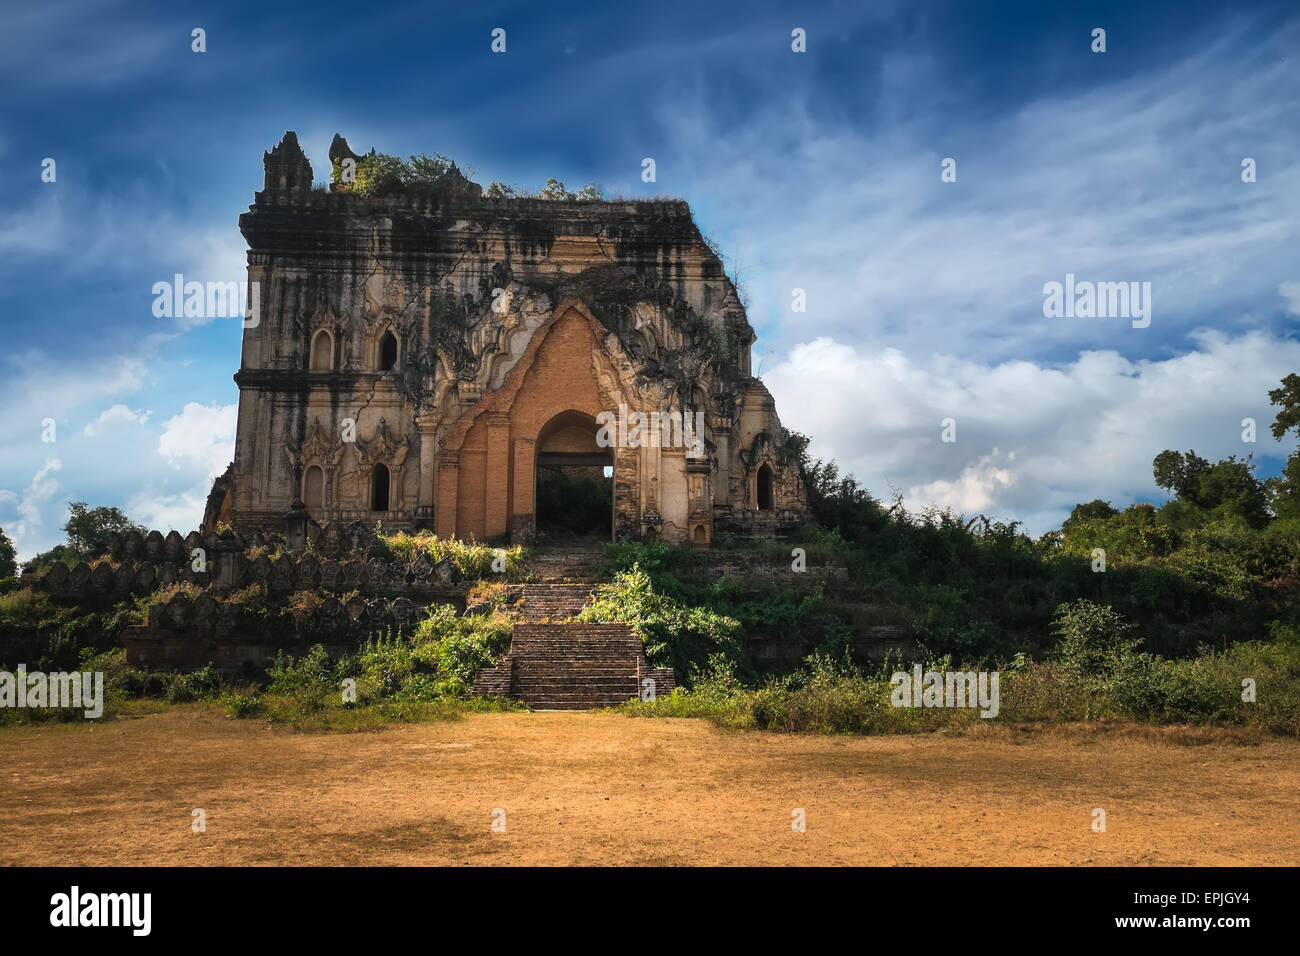 Cloudy sky over amazing architecture of old Buddhist Temple ruins at Inwa city near Mandalay. Myanmar (Burma) travel landscapes Stock Photo